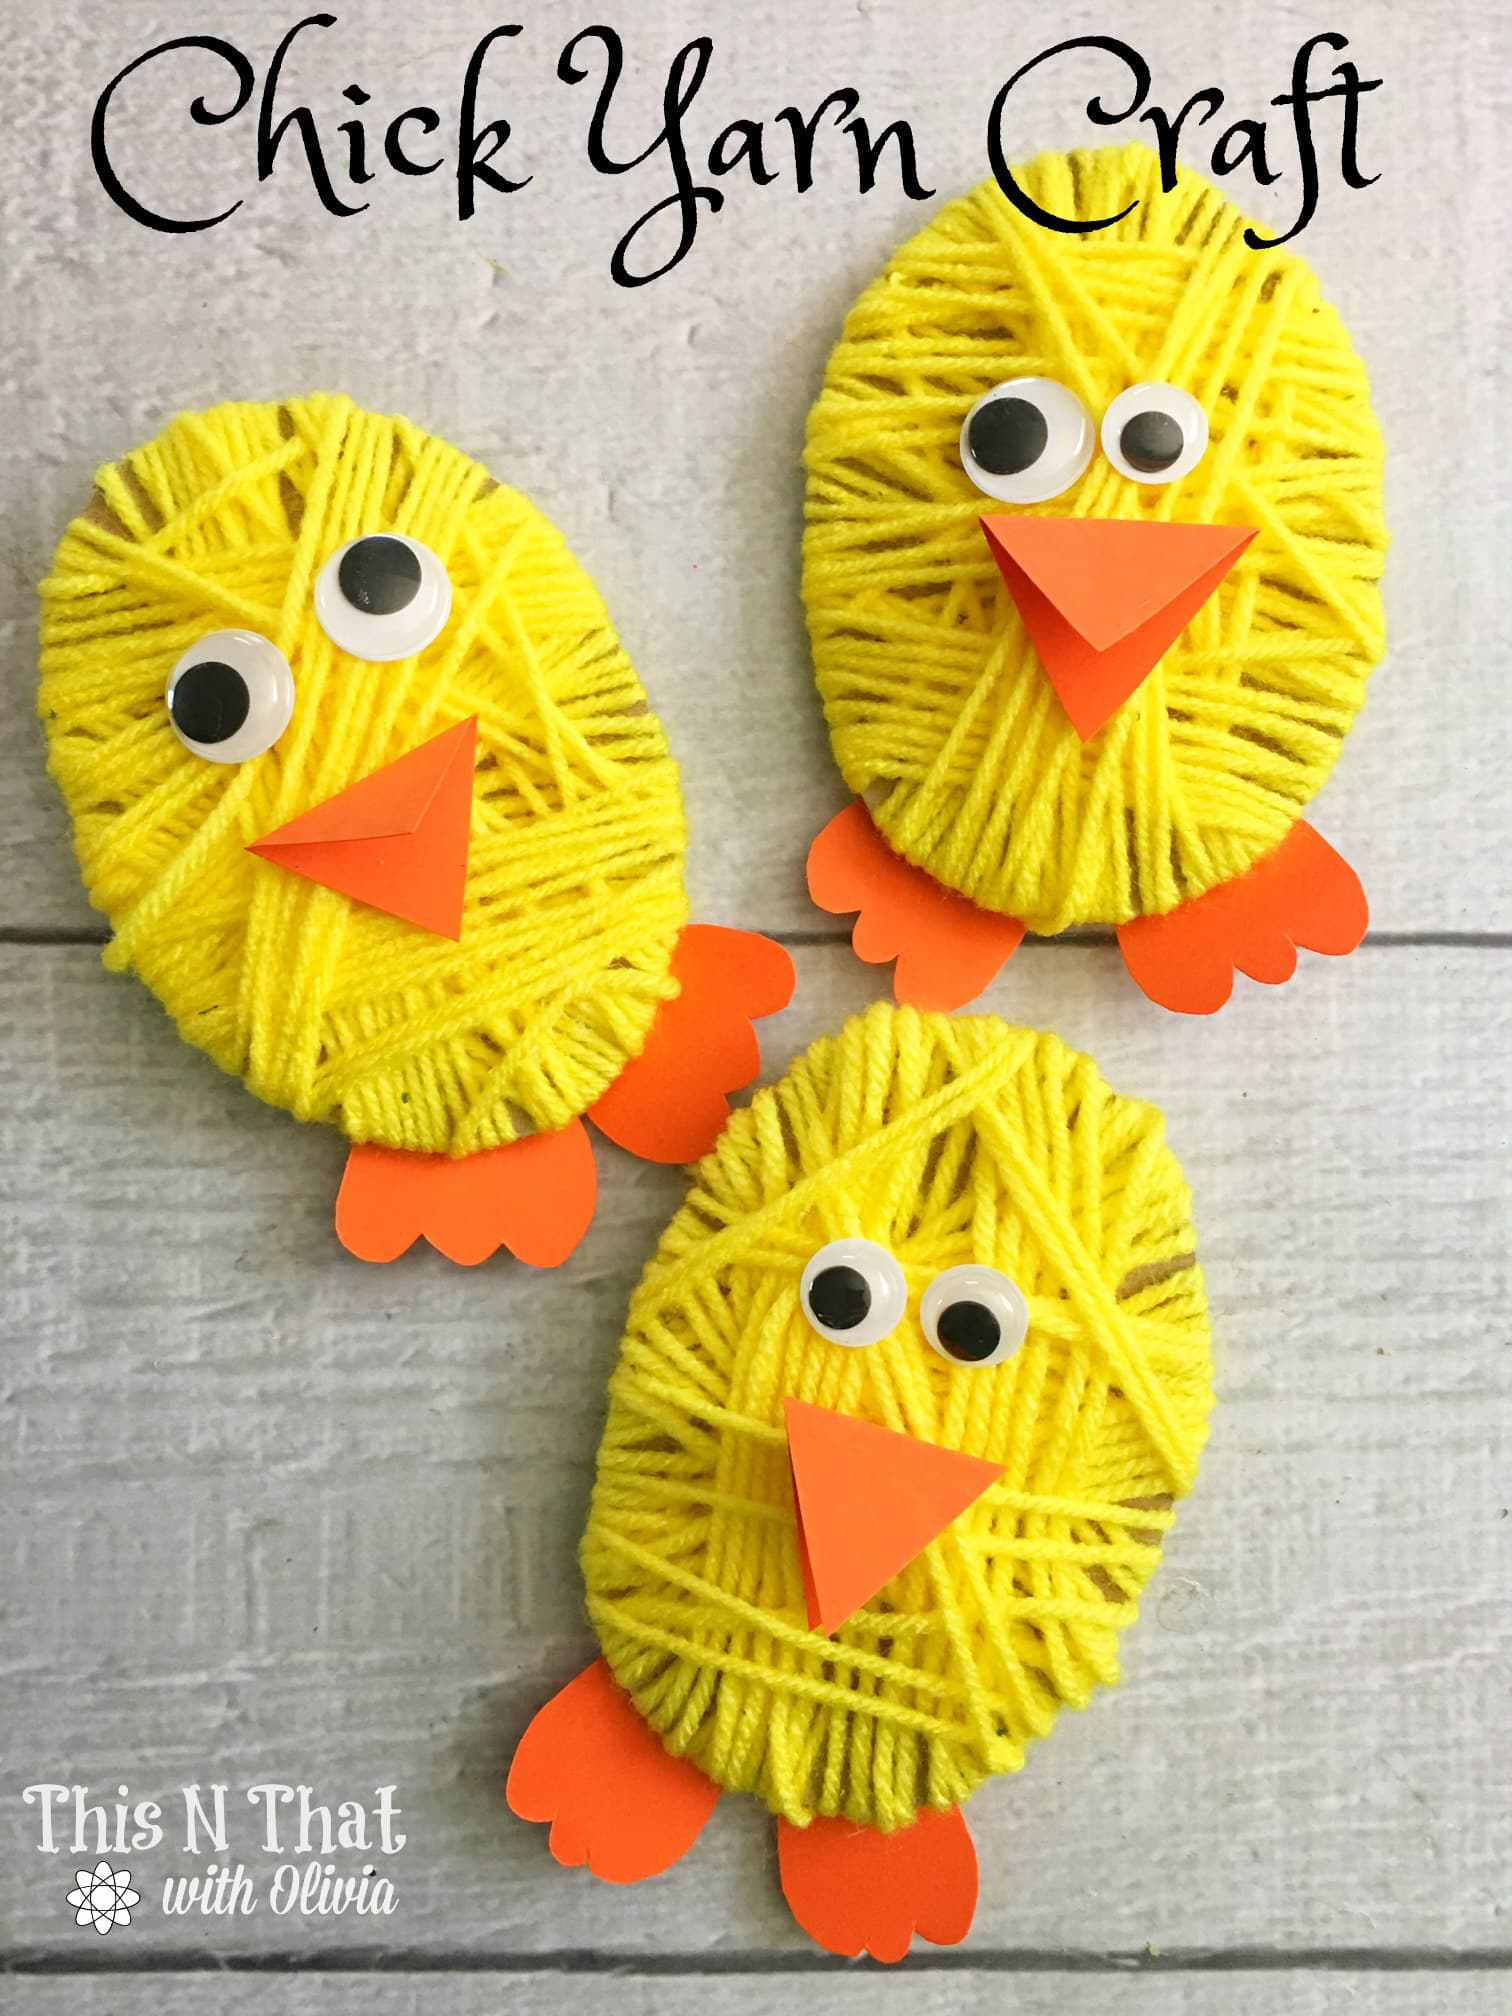 Craft Ideas For Toddlers
 Over 33 Easter Craft Ideas for Kids to Make Simple Cute